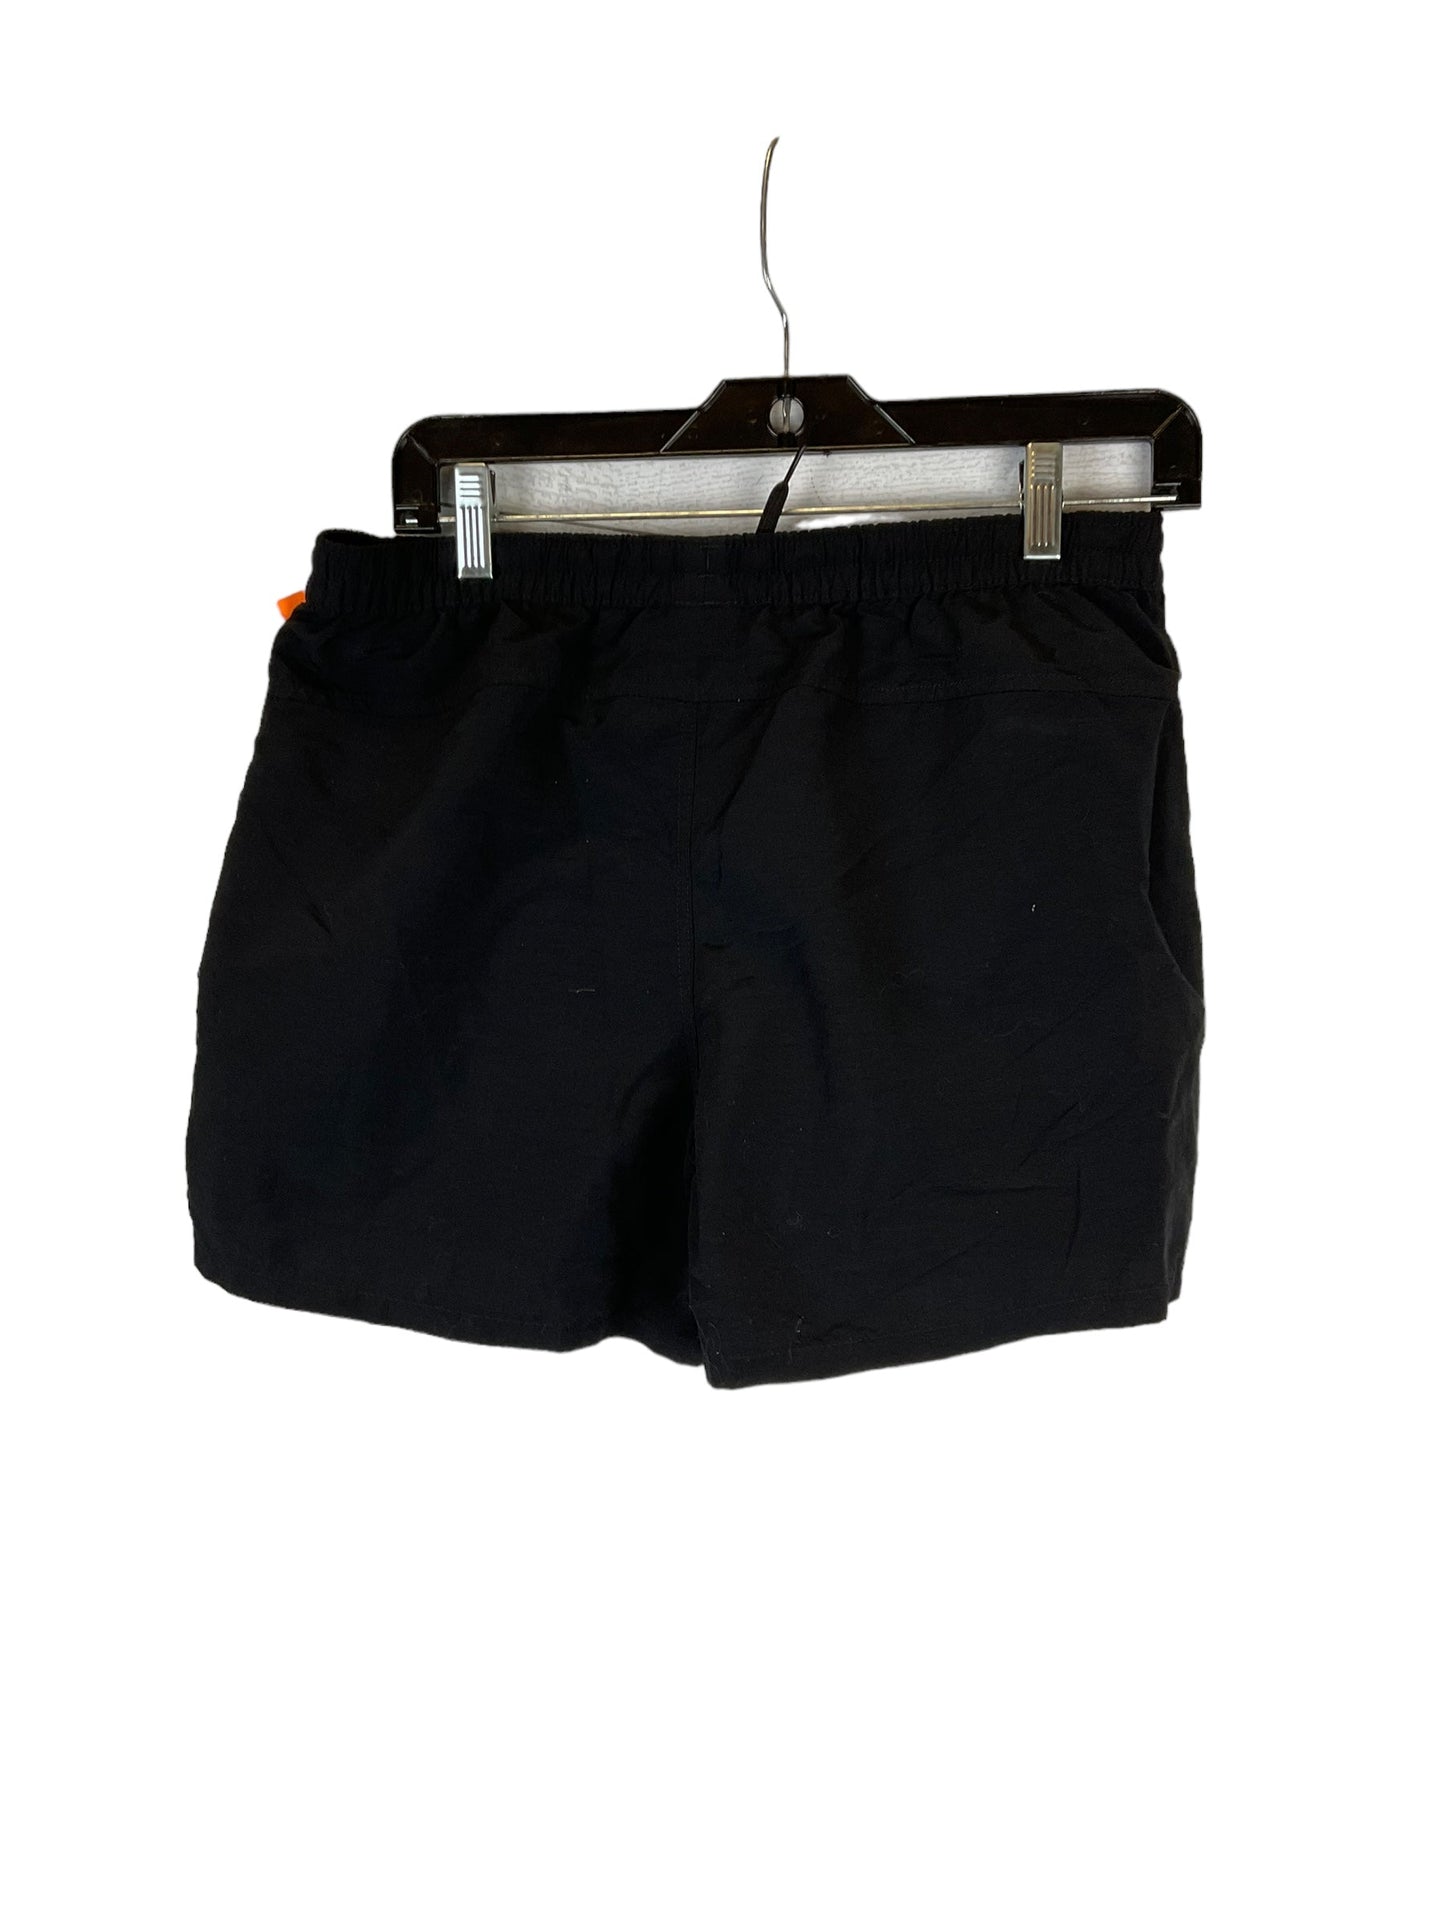 Shorts Designer By Patagonia  Size: S